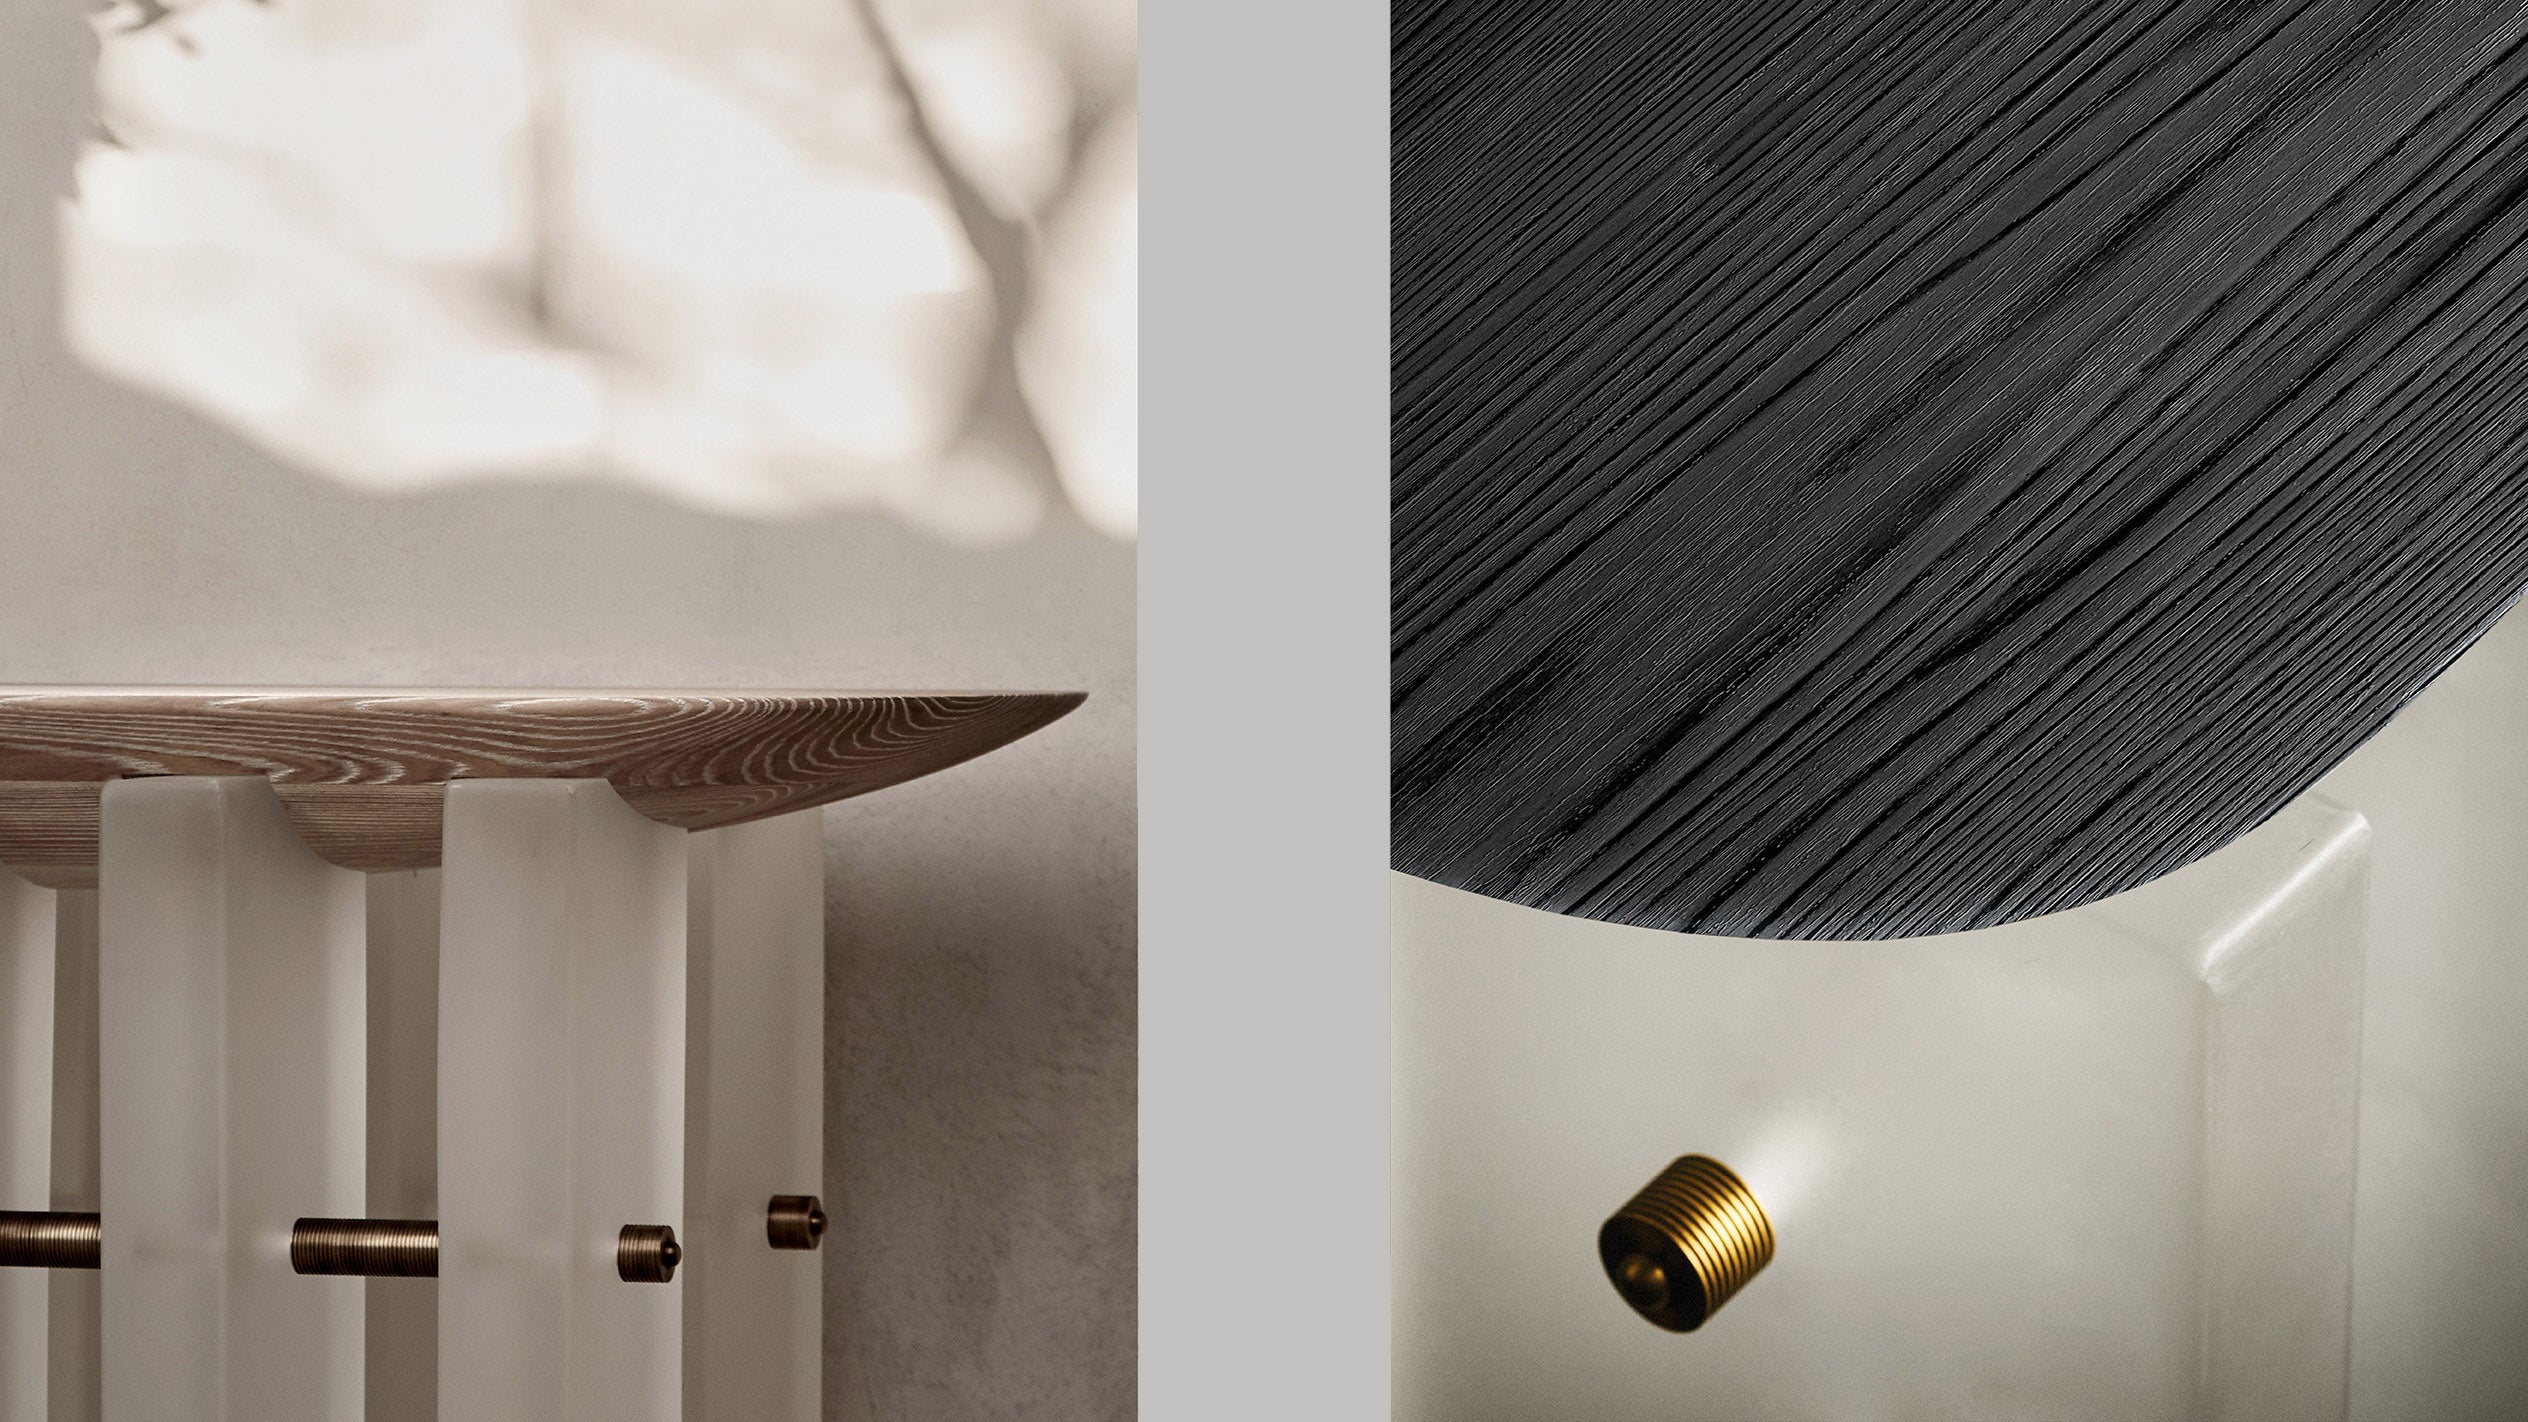 Close ups of the SEGMENT cocktail table showing details of the Bleached Ash Wood and Blackened Ash Wood material options. 